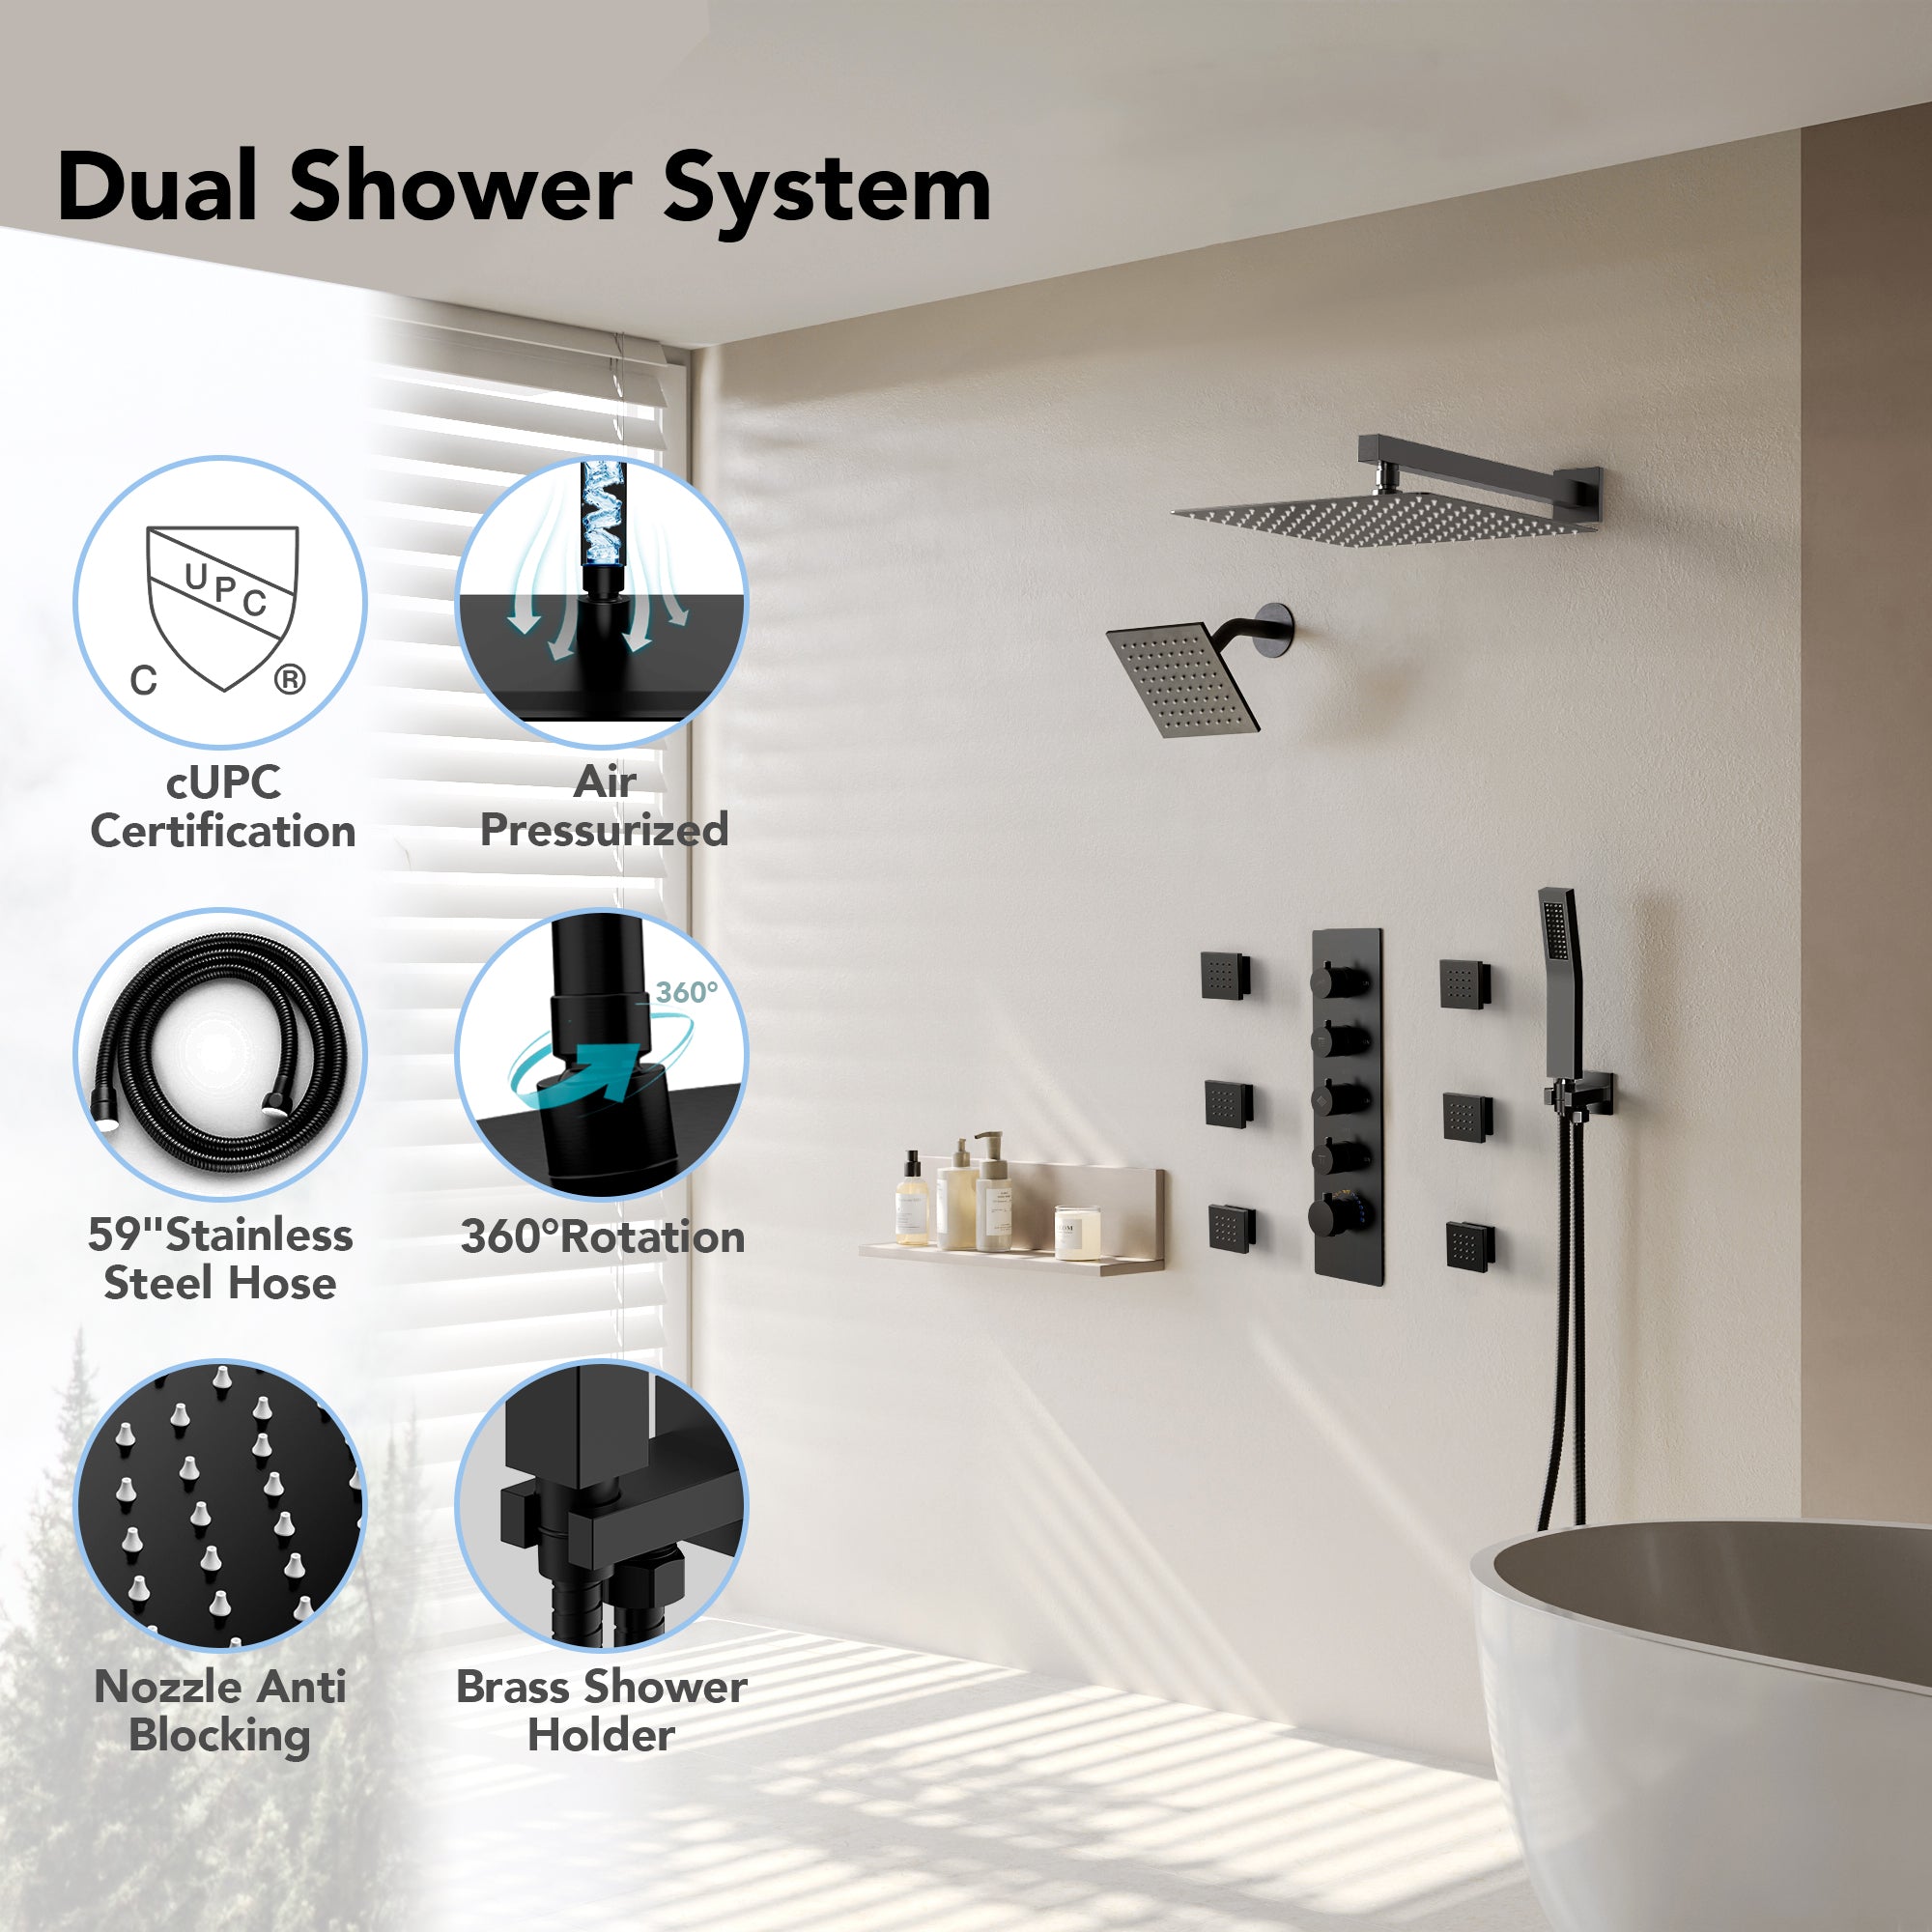 EVERSTEIN SFS-1064-BK16 16" High-Pressure Rainfall Complete Shower System with Rough-in Valve